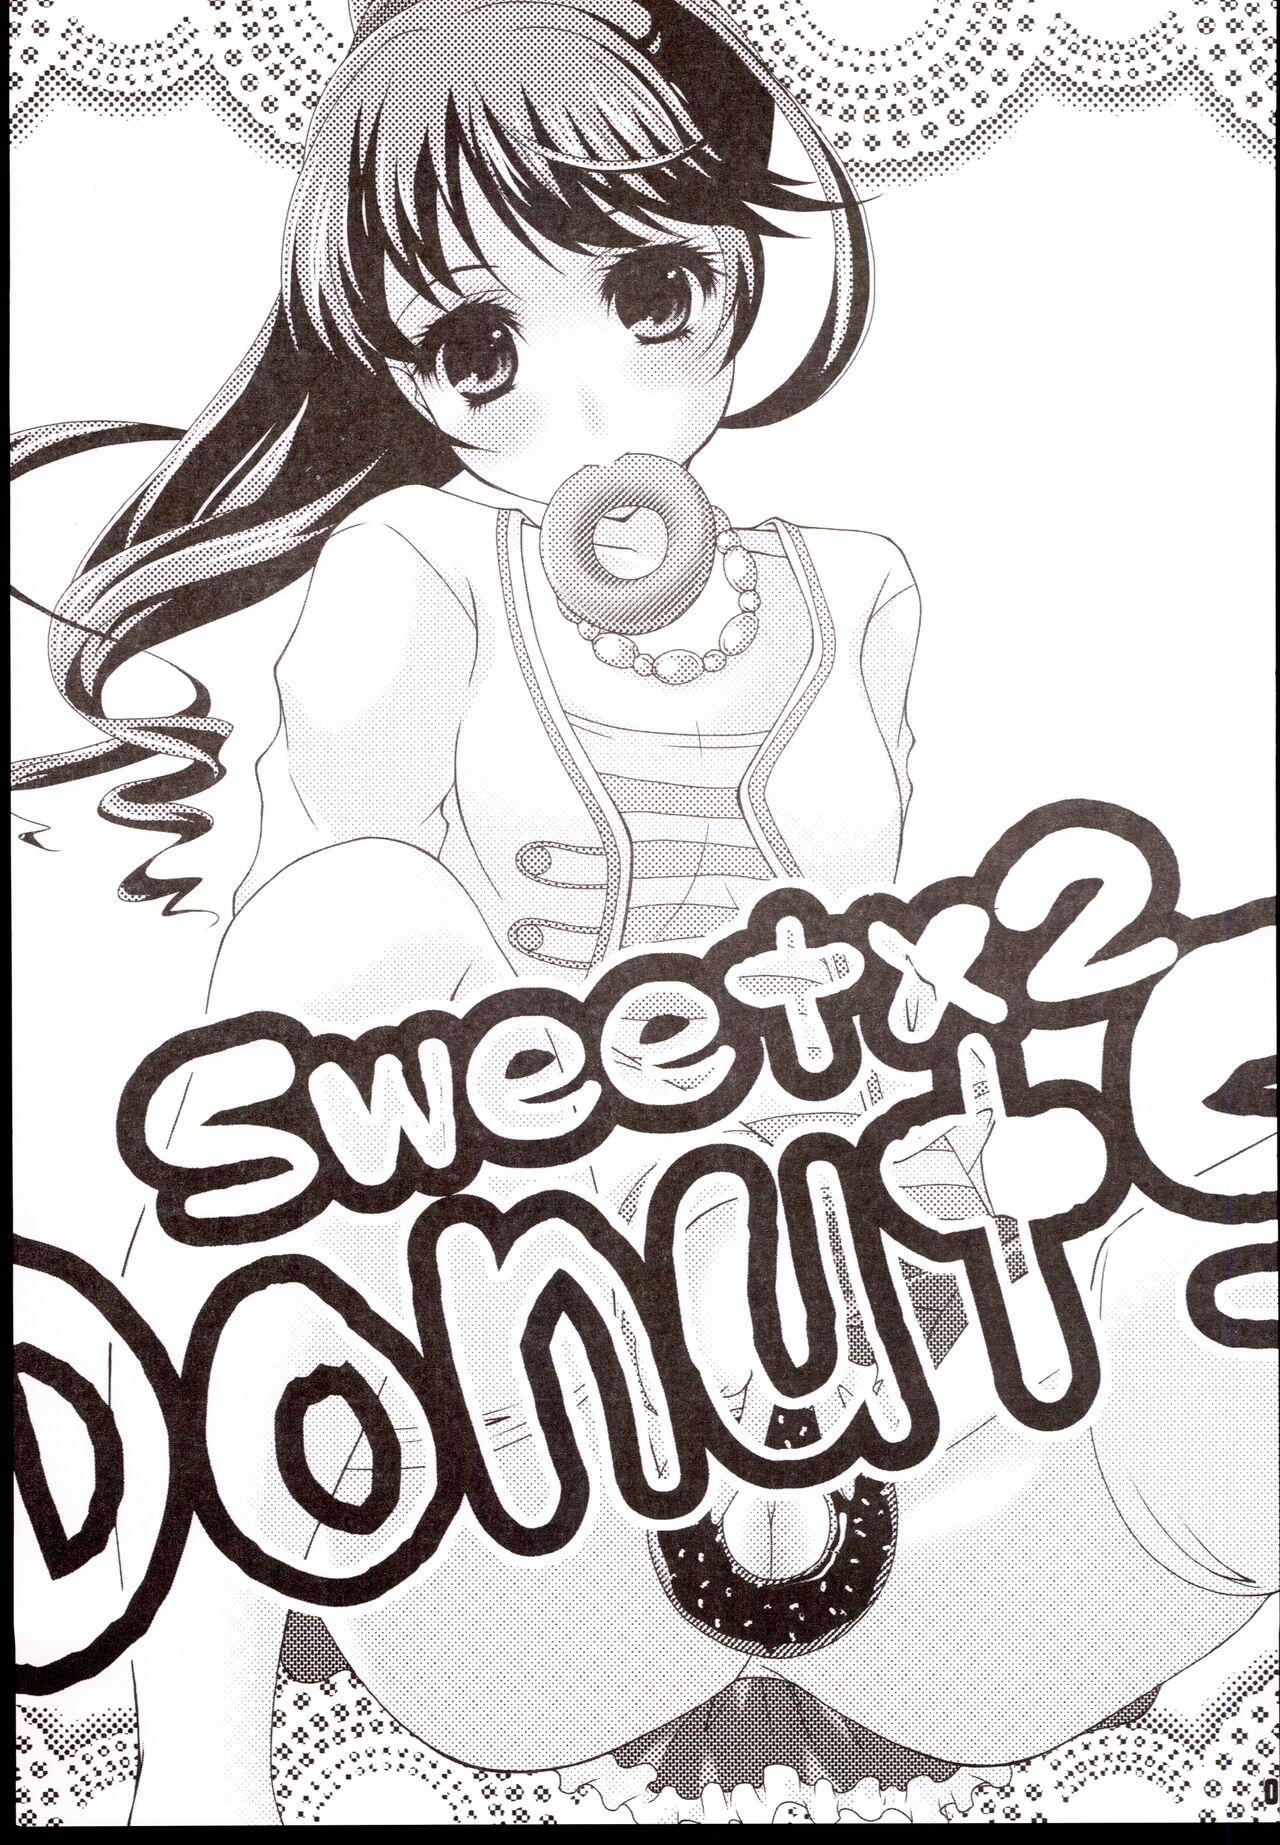 Sweetx2 DonutS! 4